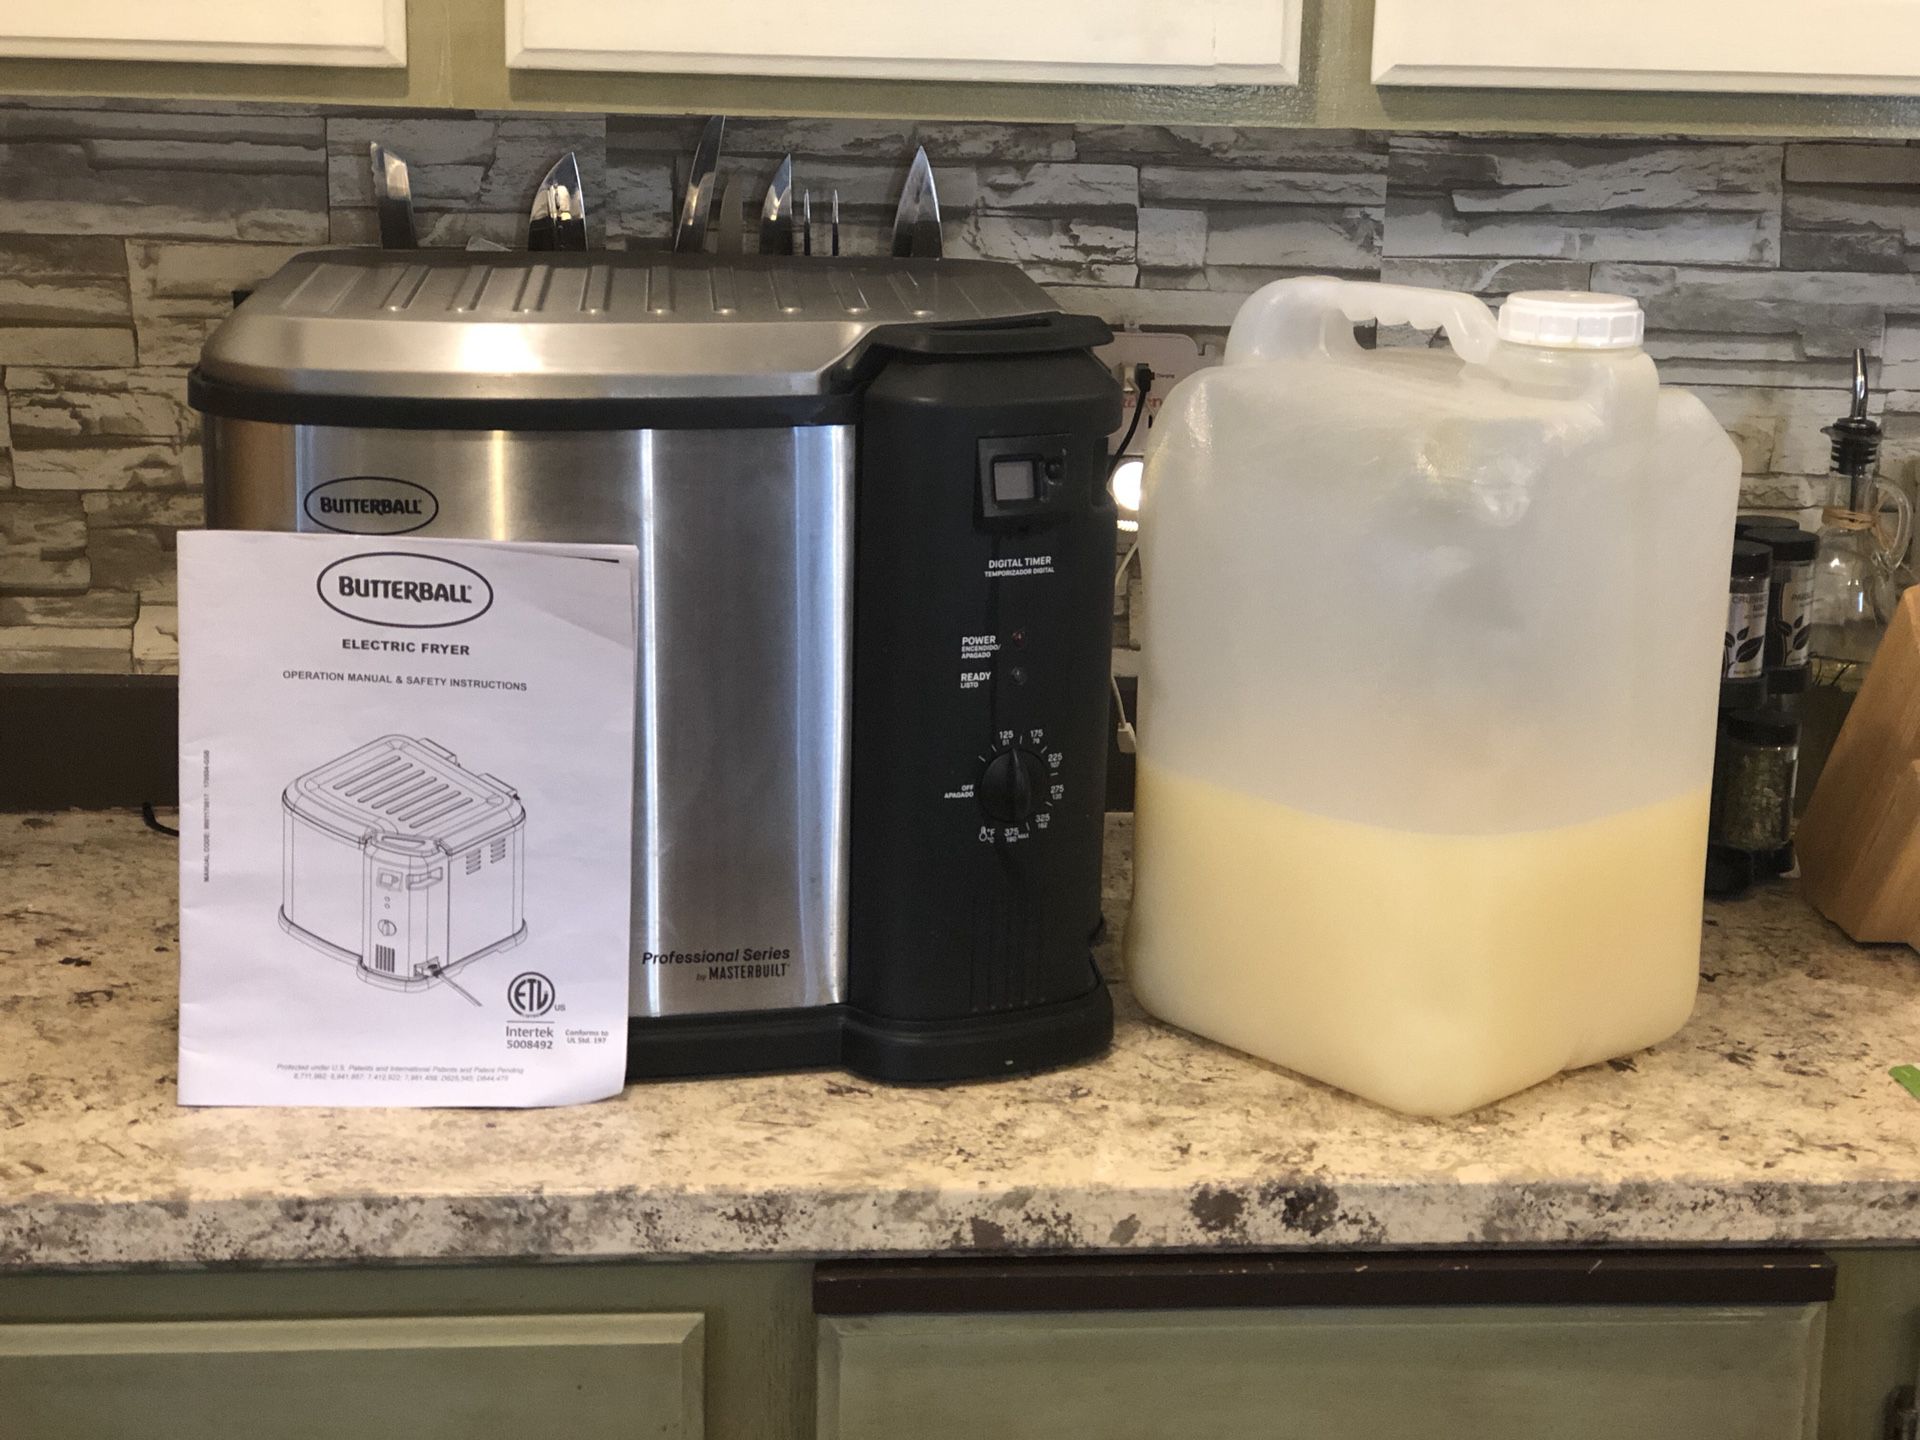 How to Steam and Boil on the Masterbuilt XL Butterball Electric Fryer 